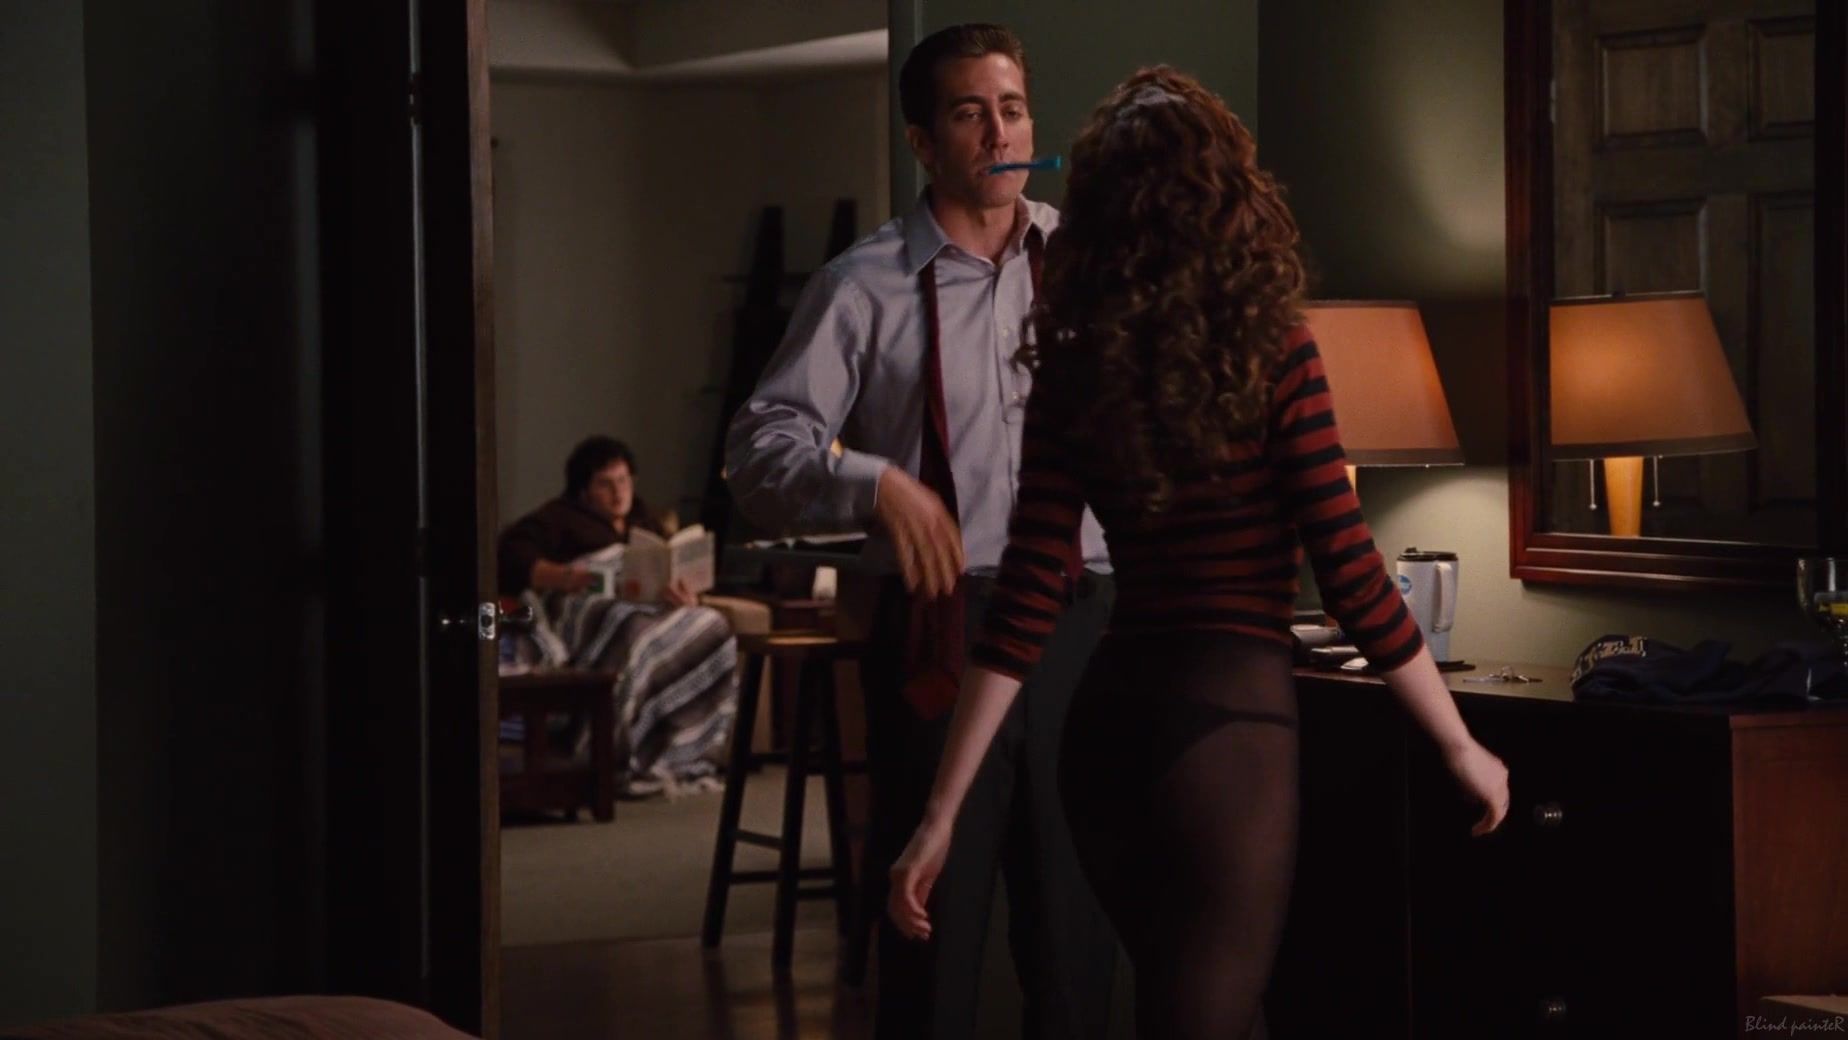 Foreplay Anne Hathaway nude - Love and Other Drugs (2010) 19yo - 1